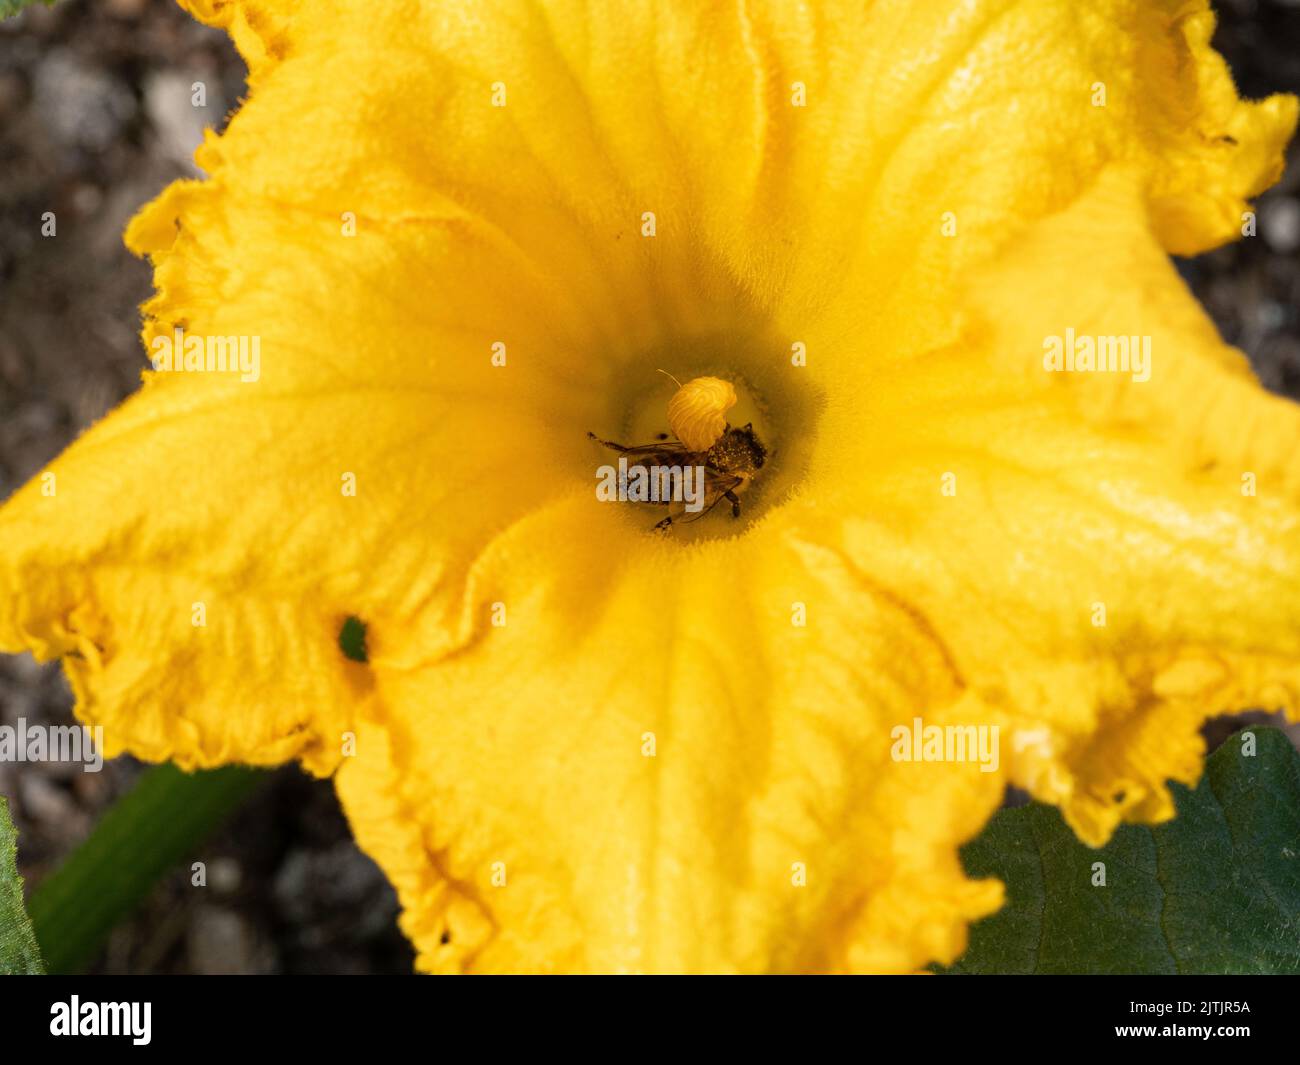 A close up of a honey bee collecting nectar from a bright yellow courgette plant Stock Photo